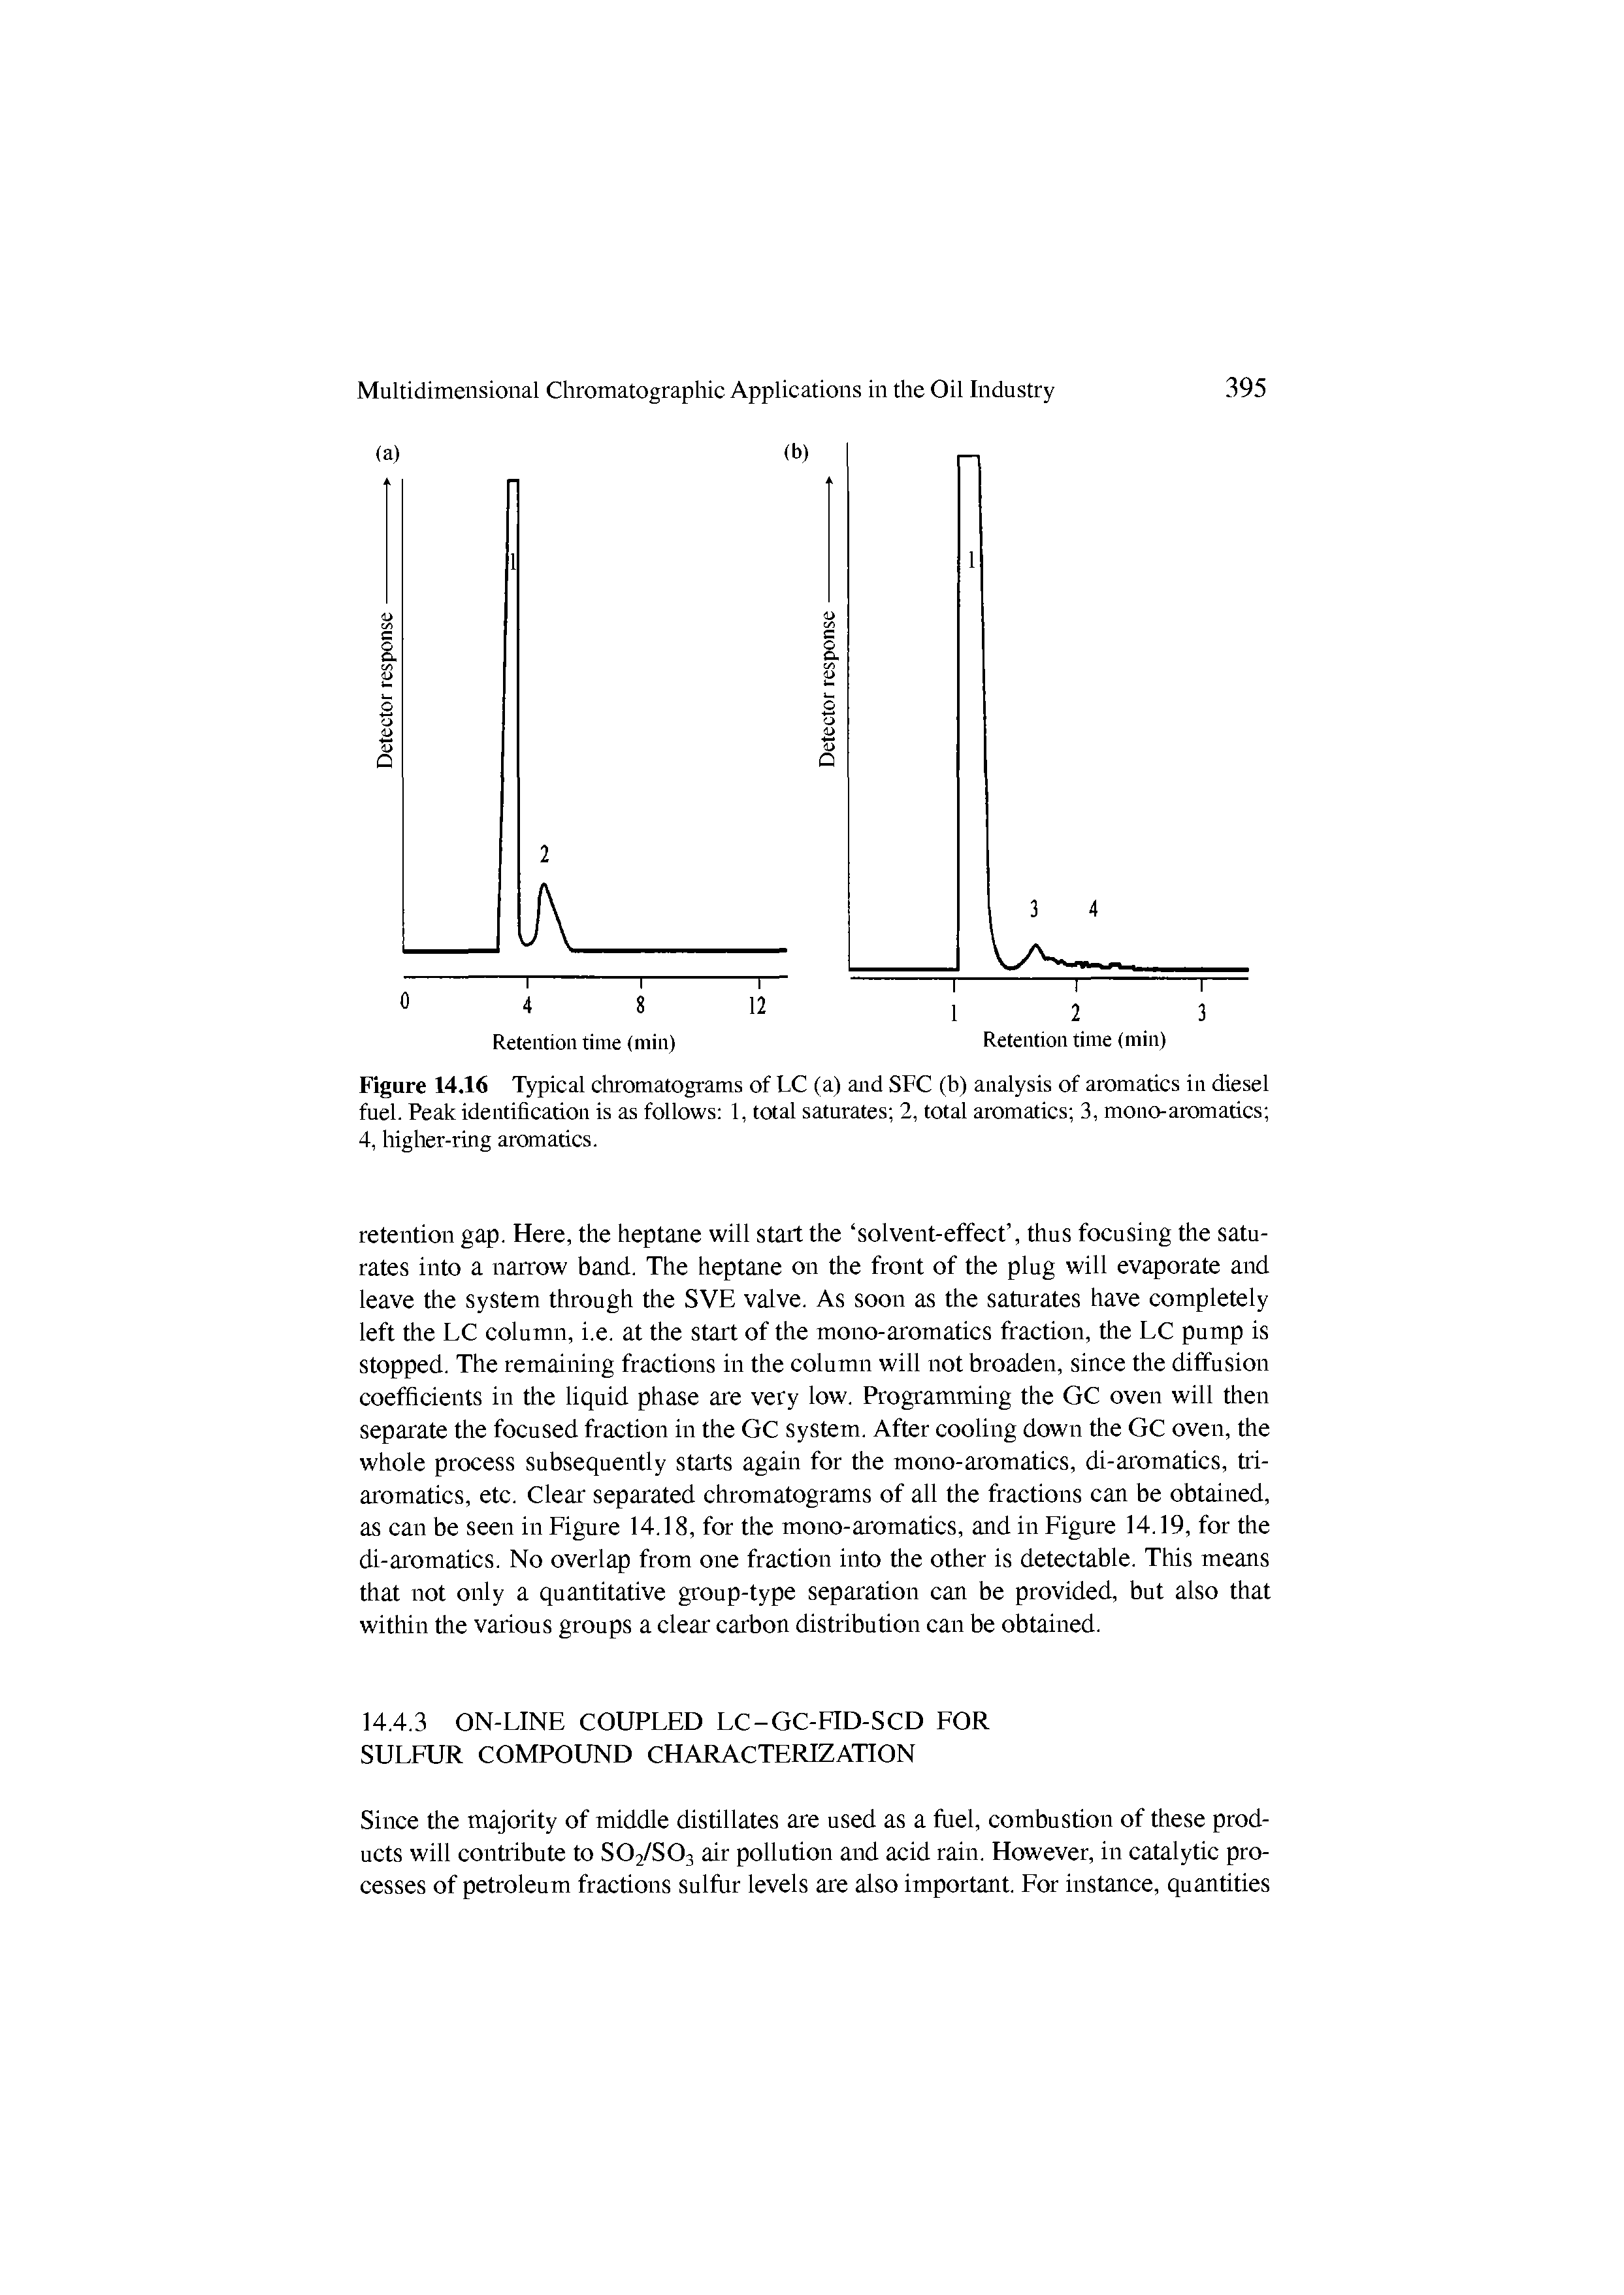 Figure 14.16 Typical cliromatograms of LC (a) and SFC (b) analysis of aromatics in diesel fuel. Peak identification is as follows 1, total saturates 2, total aromatics 3, mono-aromatics 4, higher-ring aromatics.